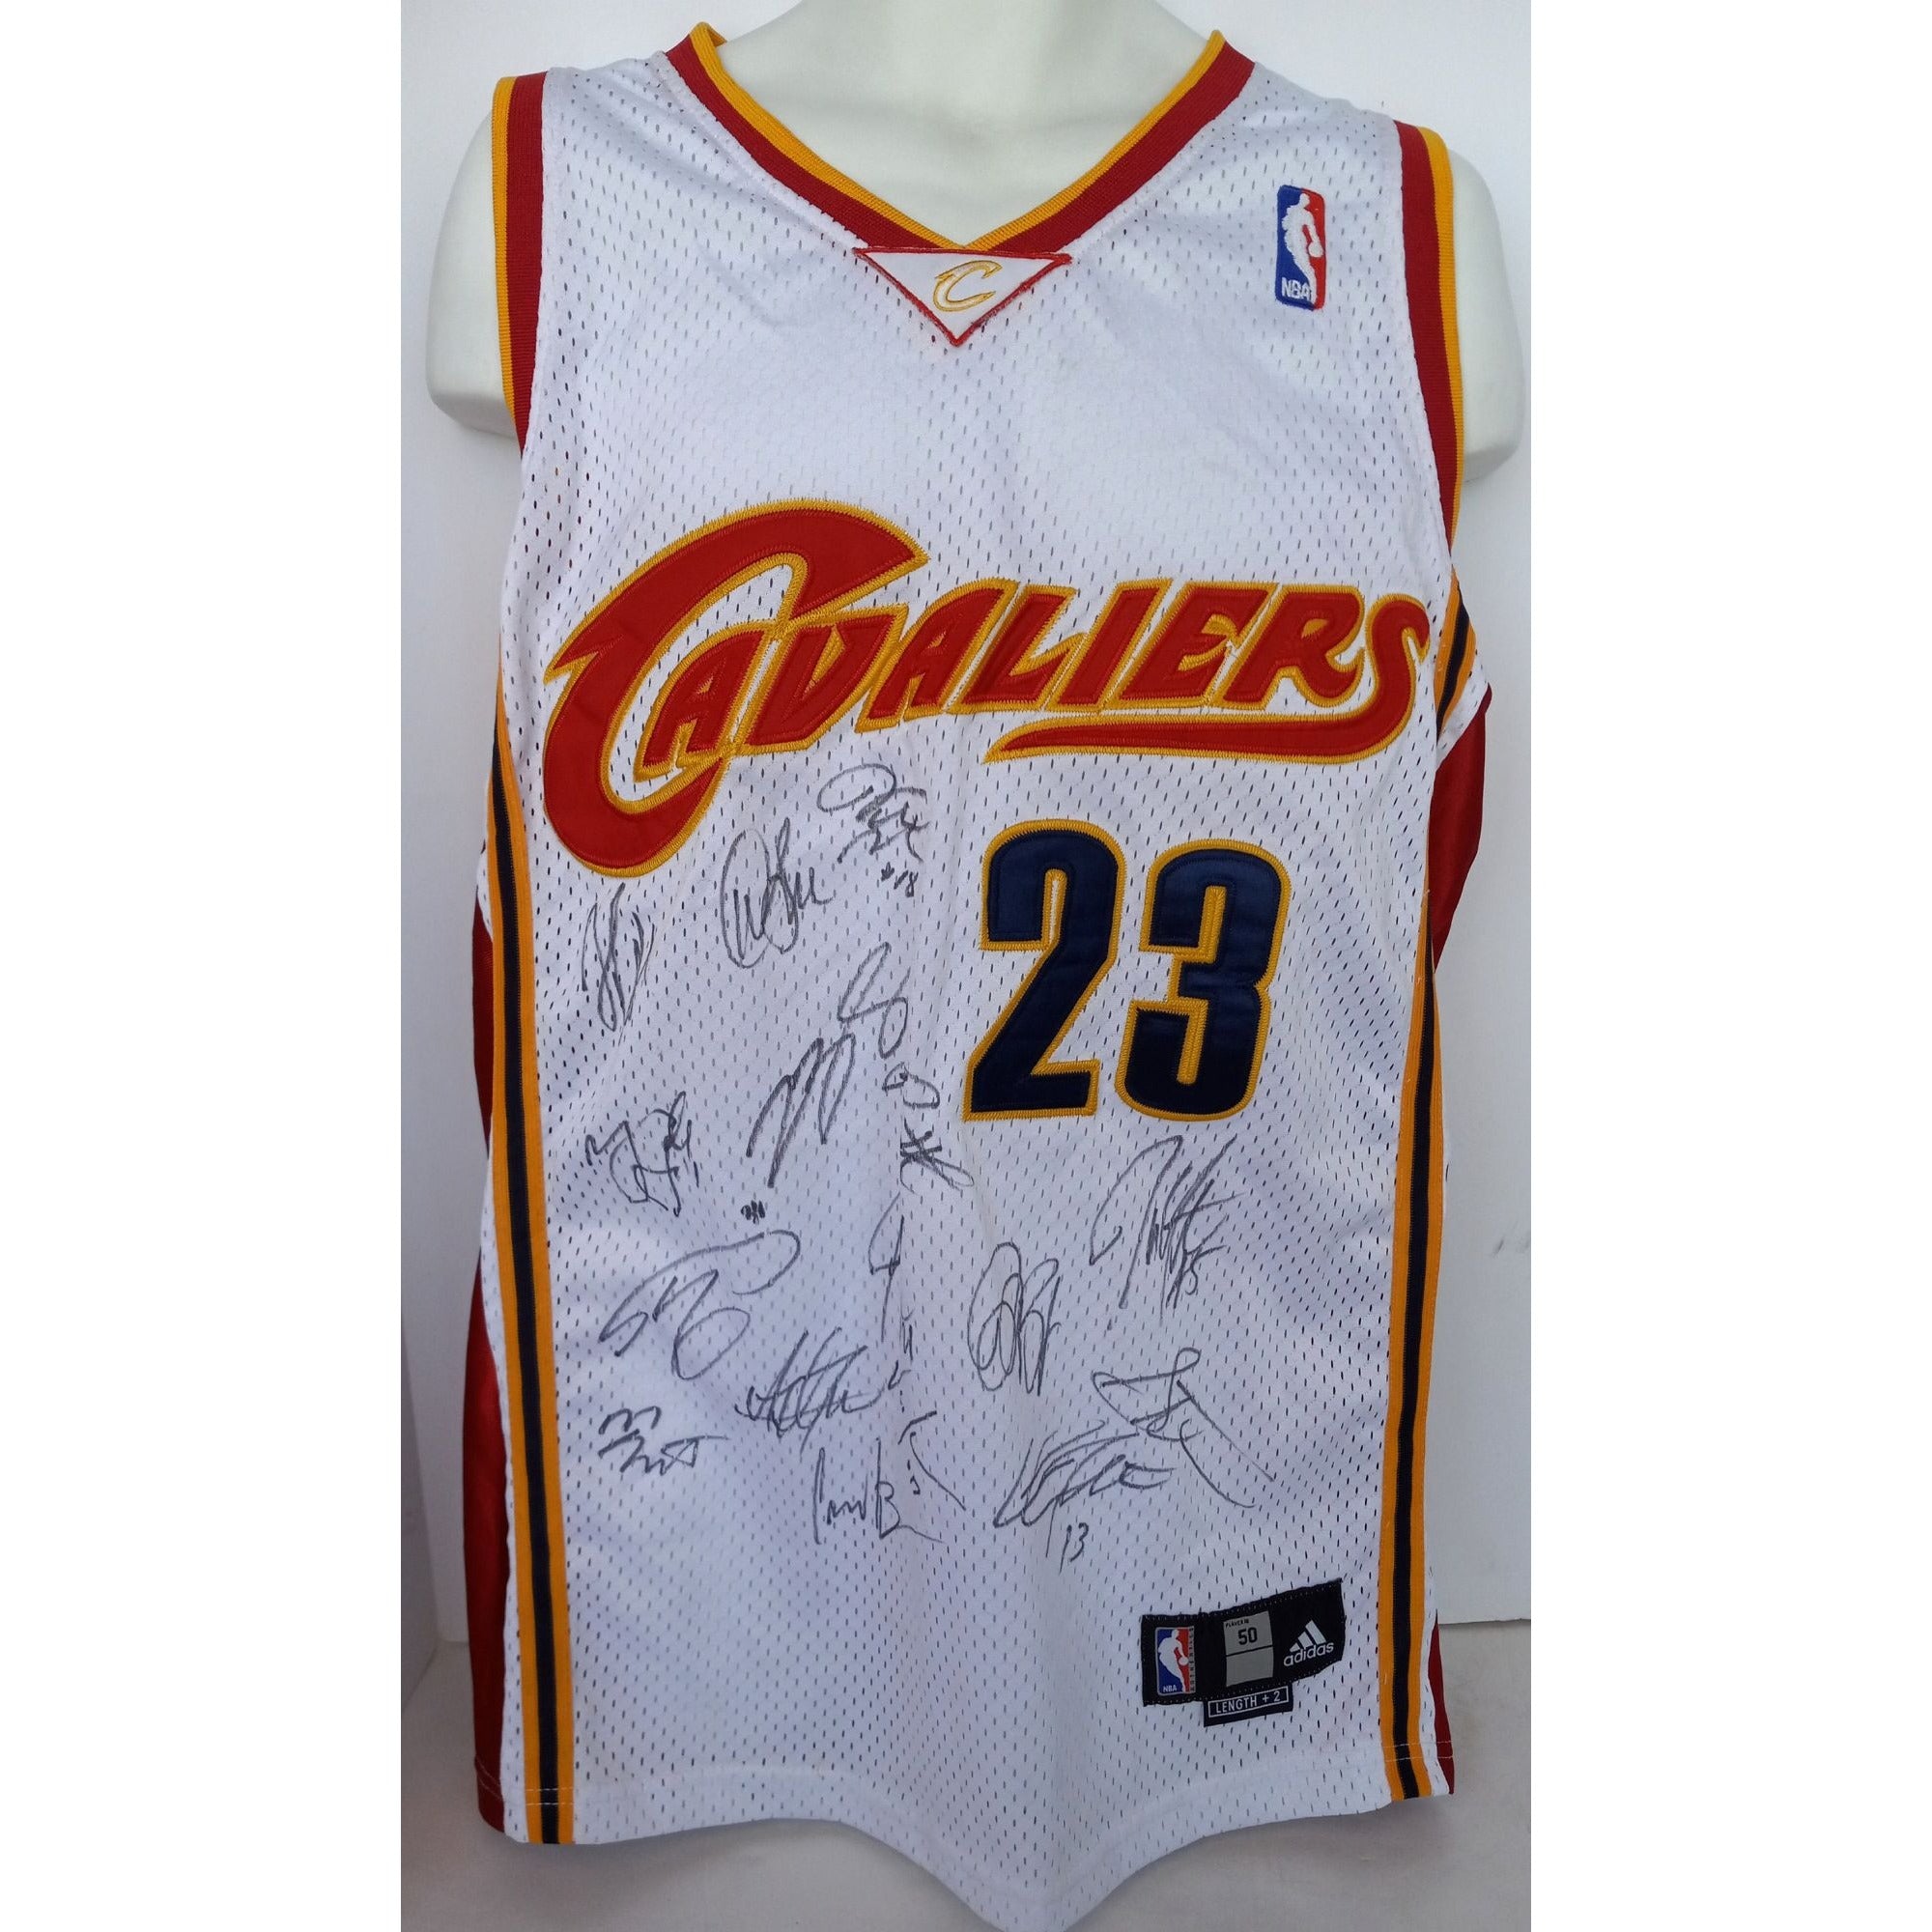 LeBron James, Shaquille O'Neal 2019 Cleveland Cavaliers team signed jersey signed with proof